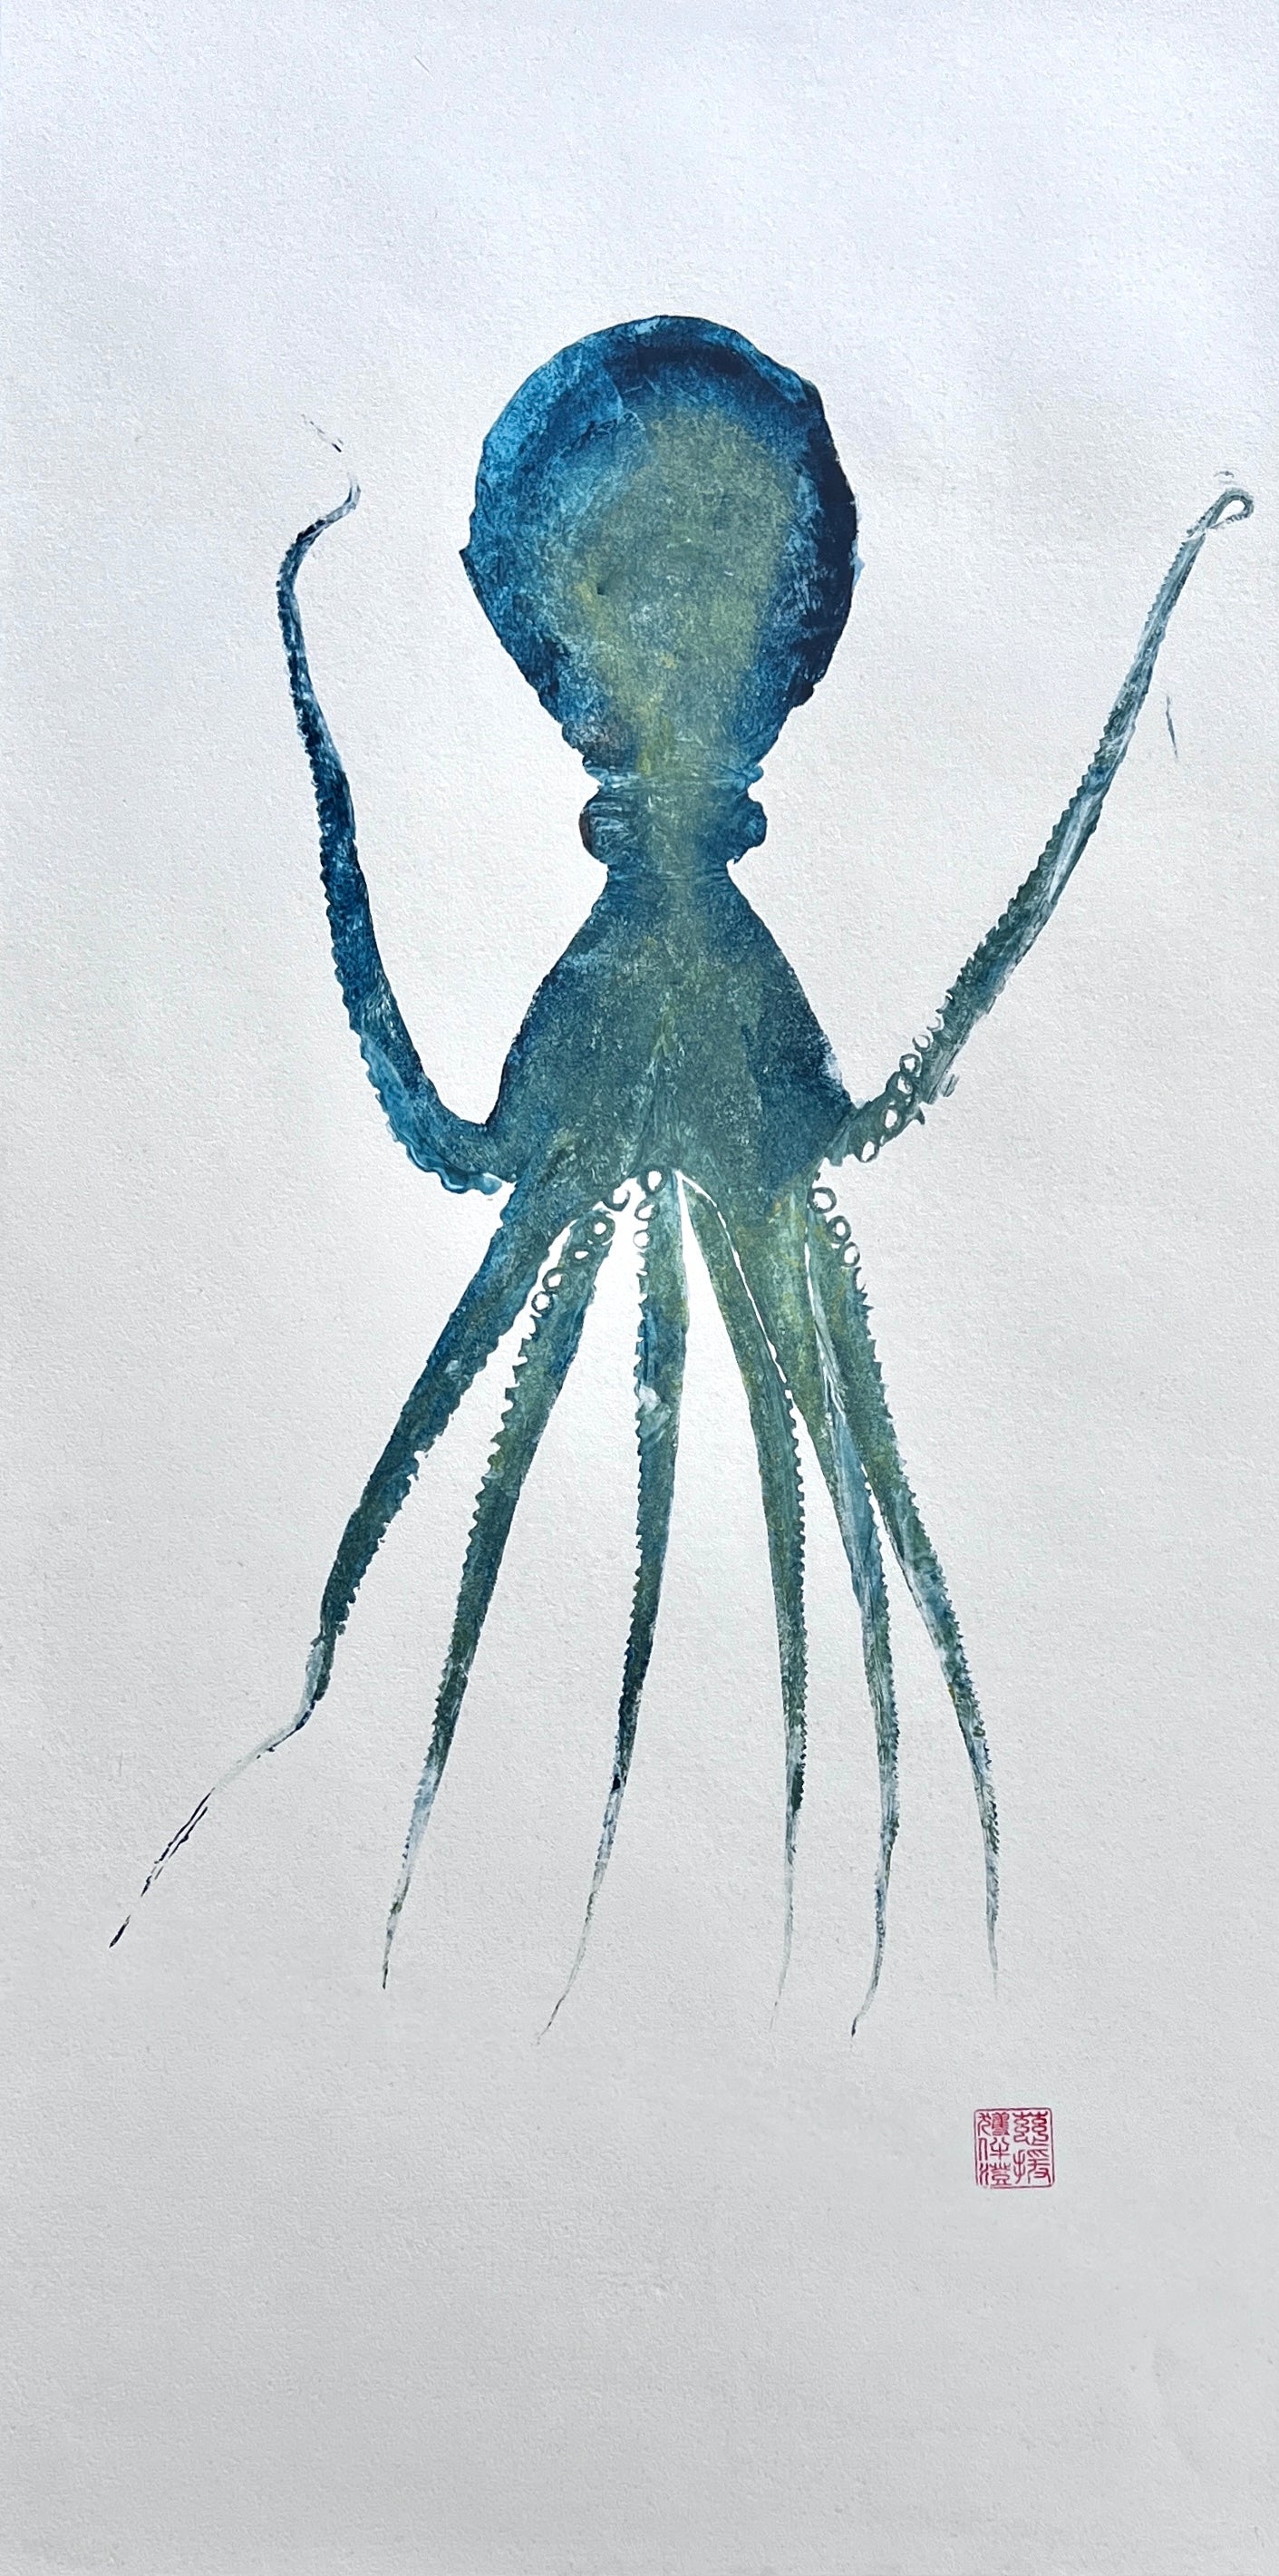 Gyotaku impression taken from the surface of Octopus